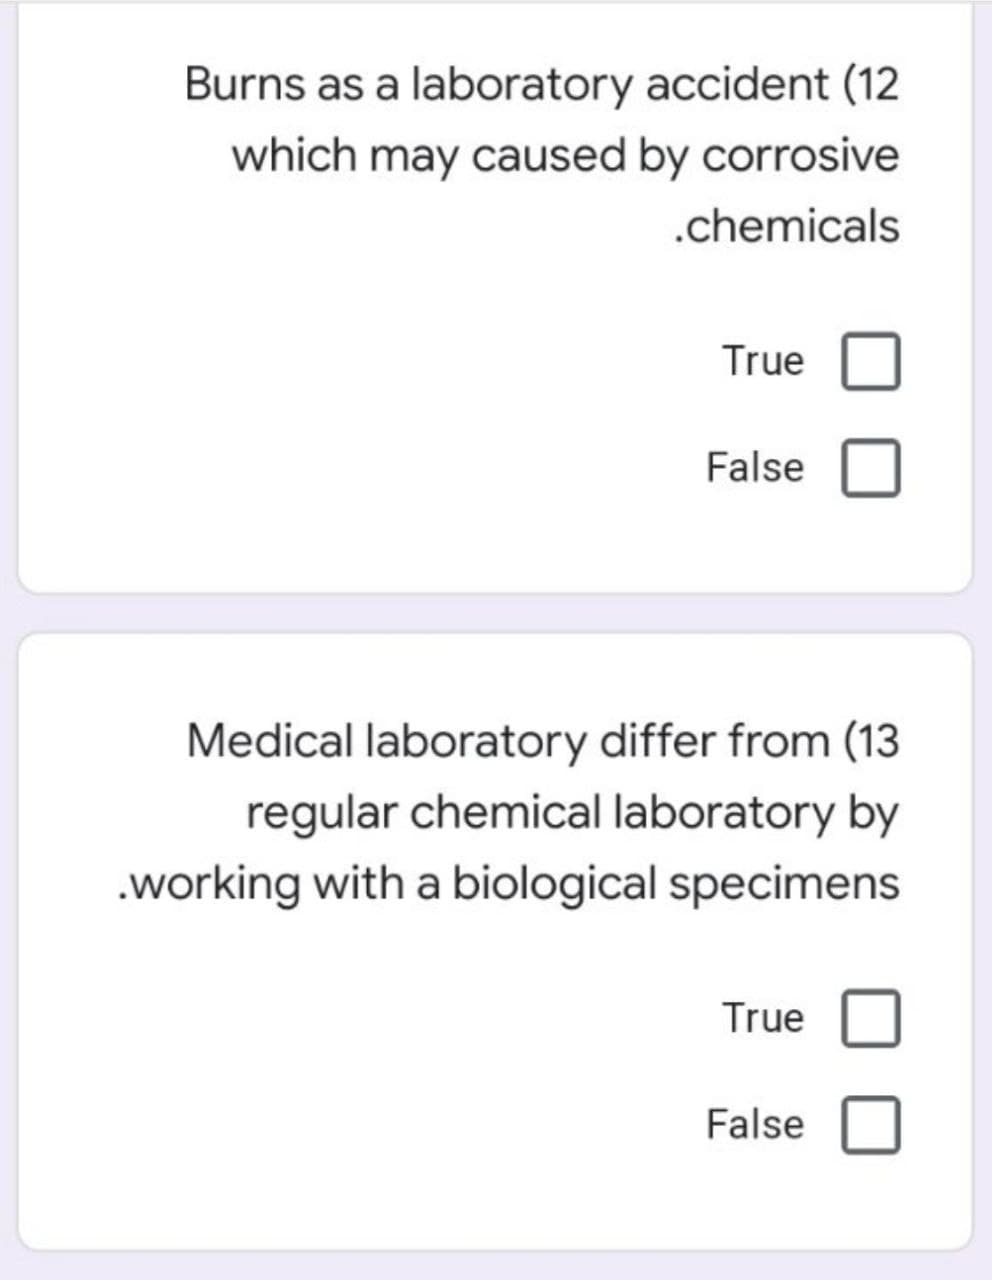 Burns as a laboratory accident (12
which may caused by corrosive
.chemicals
True
False
Medical laboratory differ from (13
regular chemical laboratory by
.working with a biological specimens
True
False
